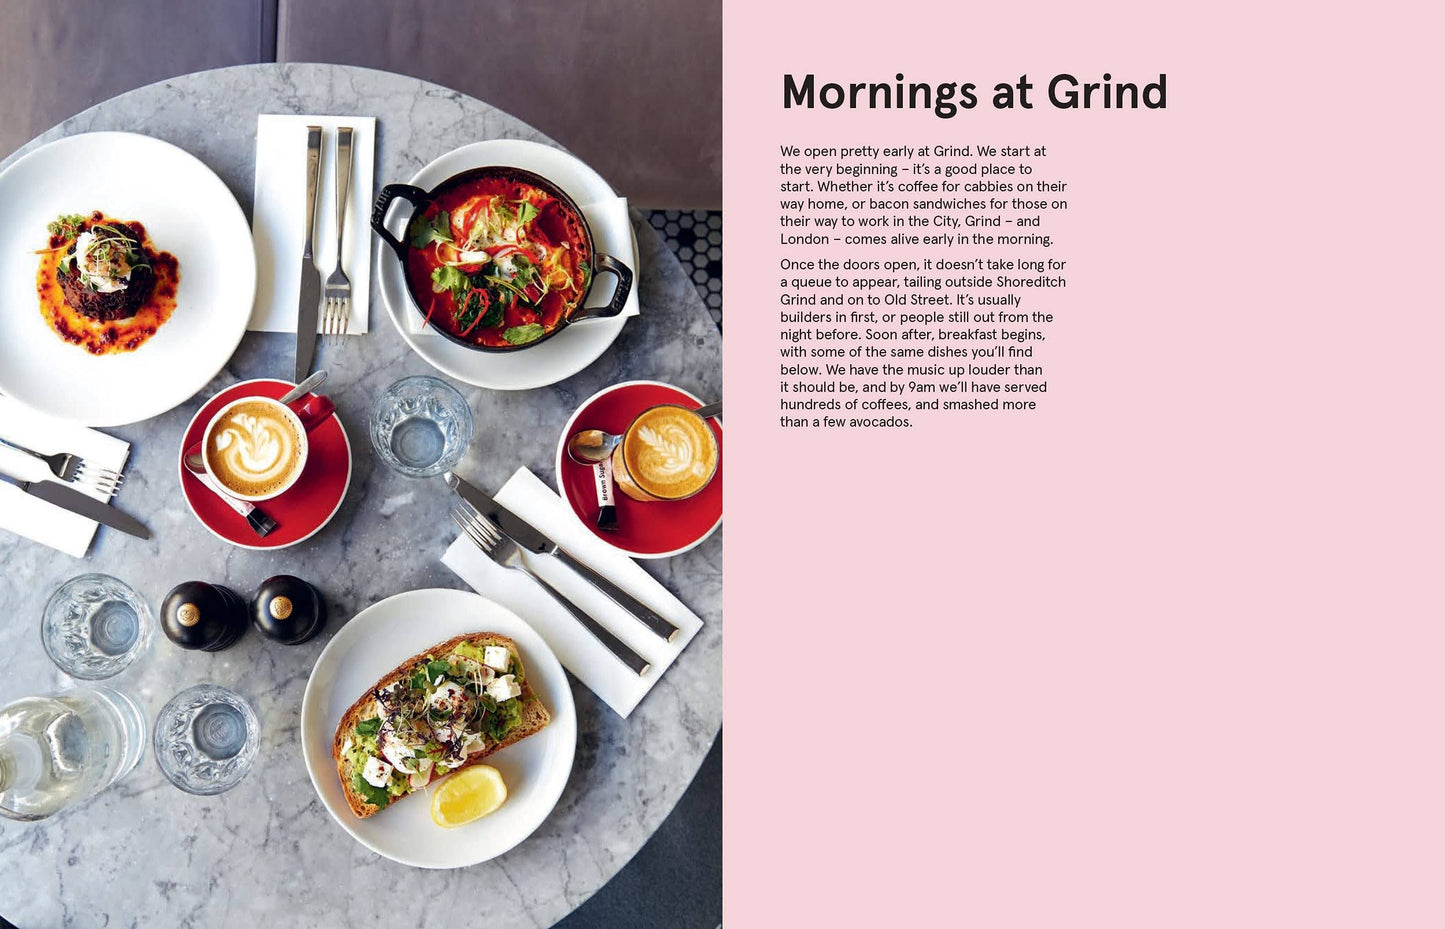 Grind: A Modern Guide to City Living: Coffee, Cocktails, Recipes & Stories